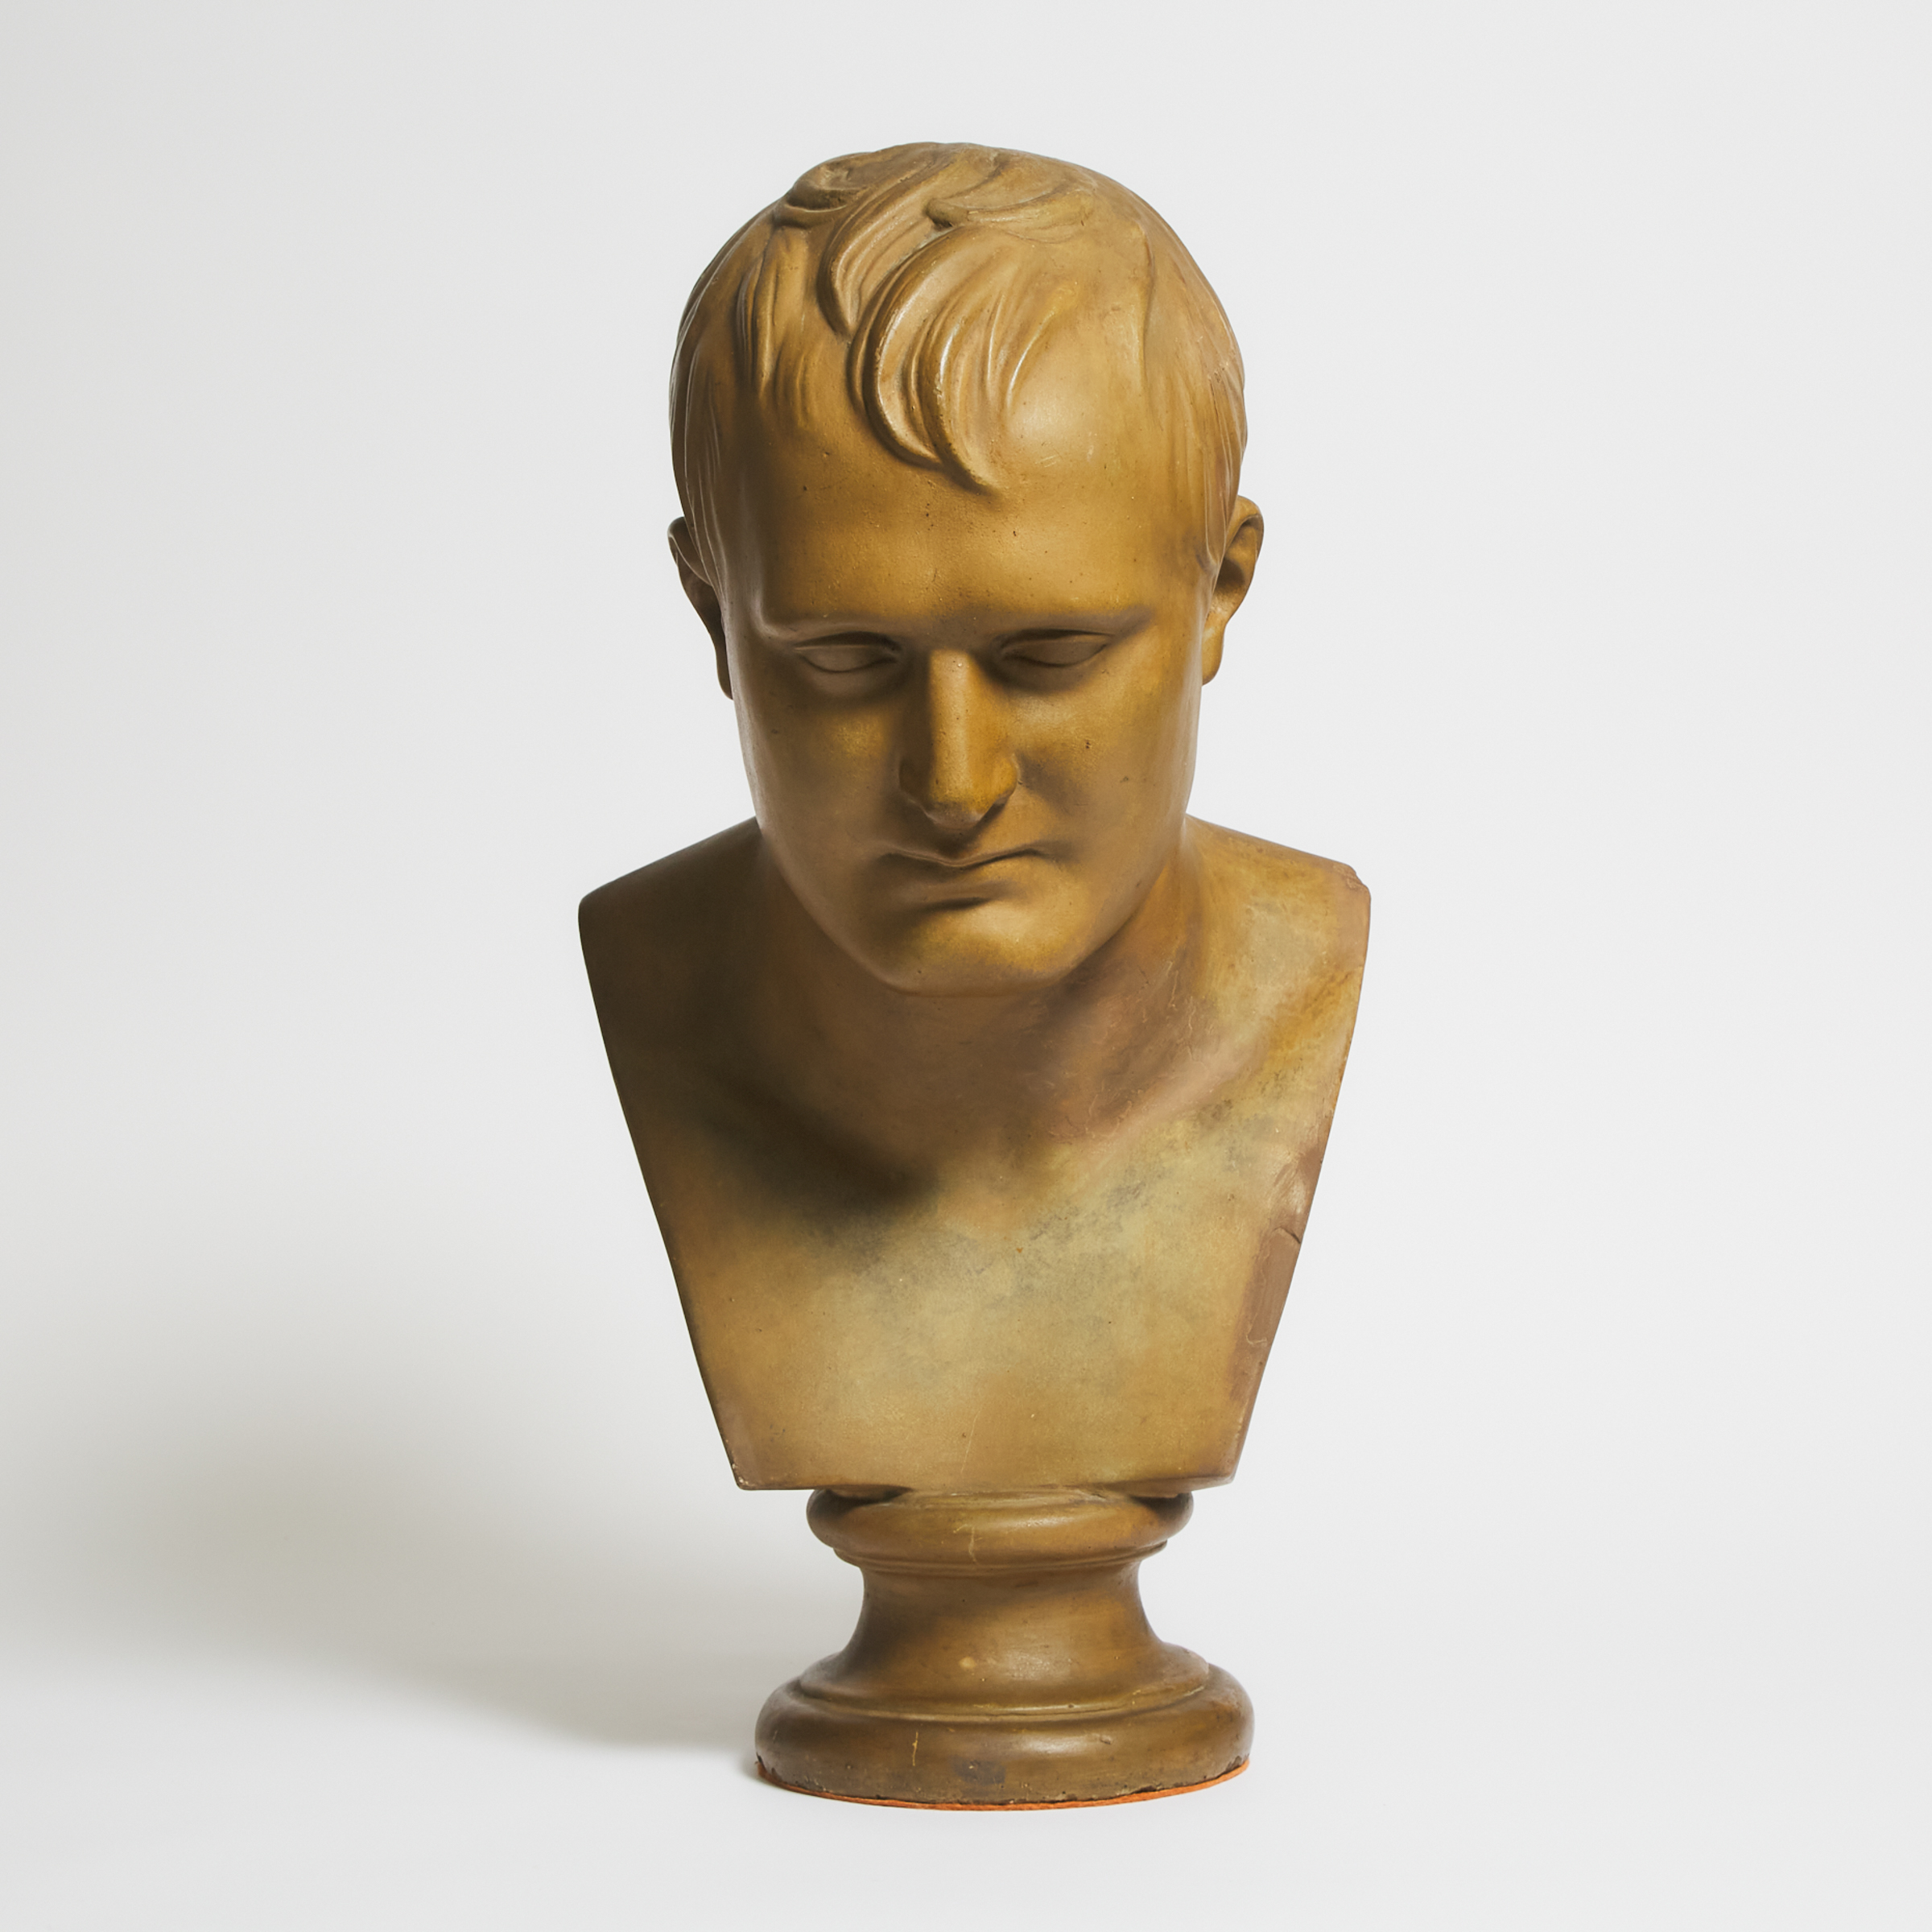 Large Patinated Plaster Bust of Napoleon, early-mid 20th century